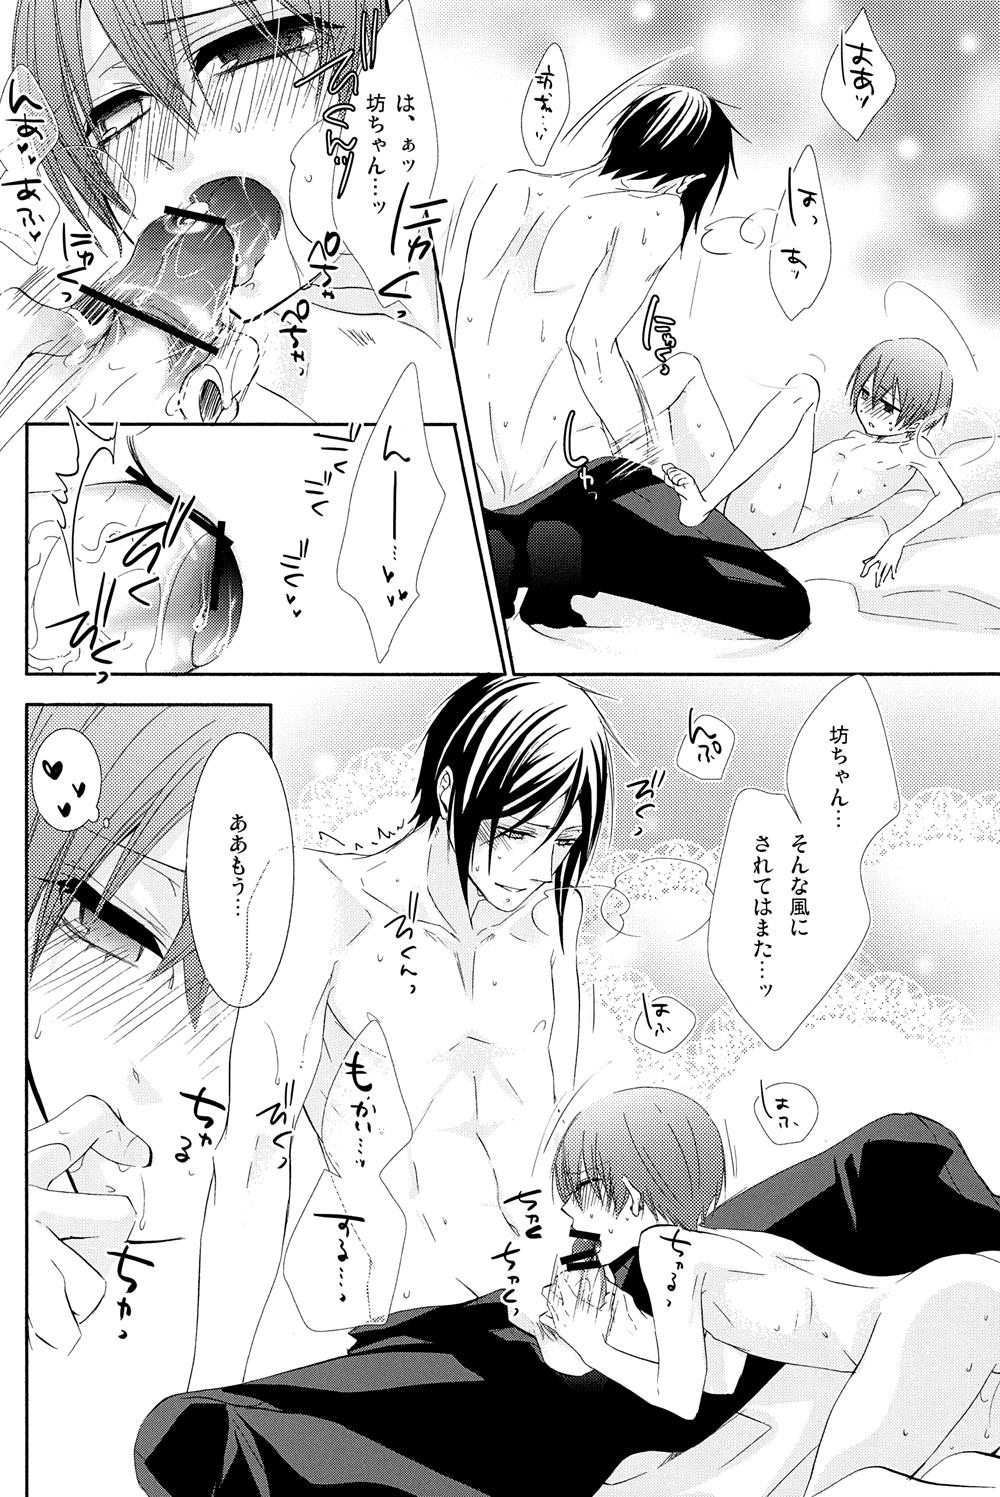 Snow White Page 28 Of 32 black butler hentai haven, Snow White Page 28 Of 3...